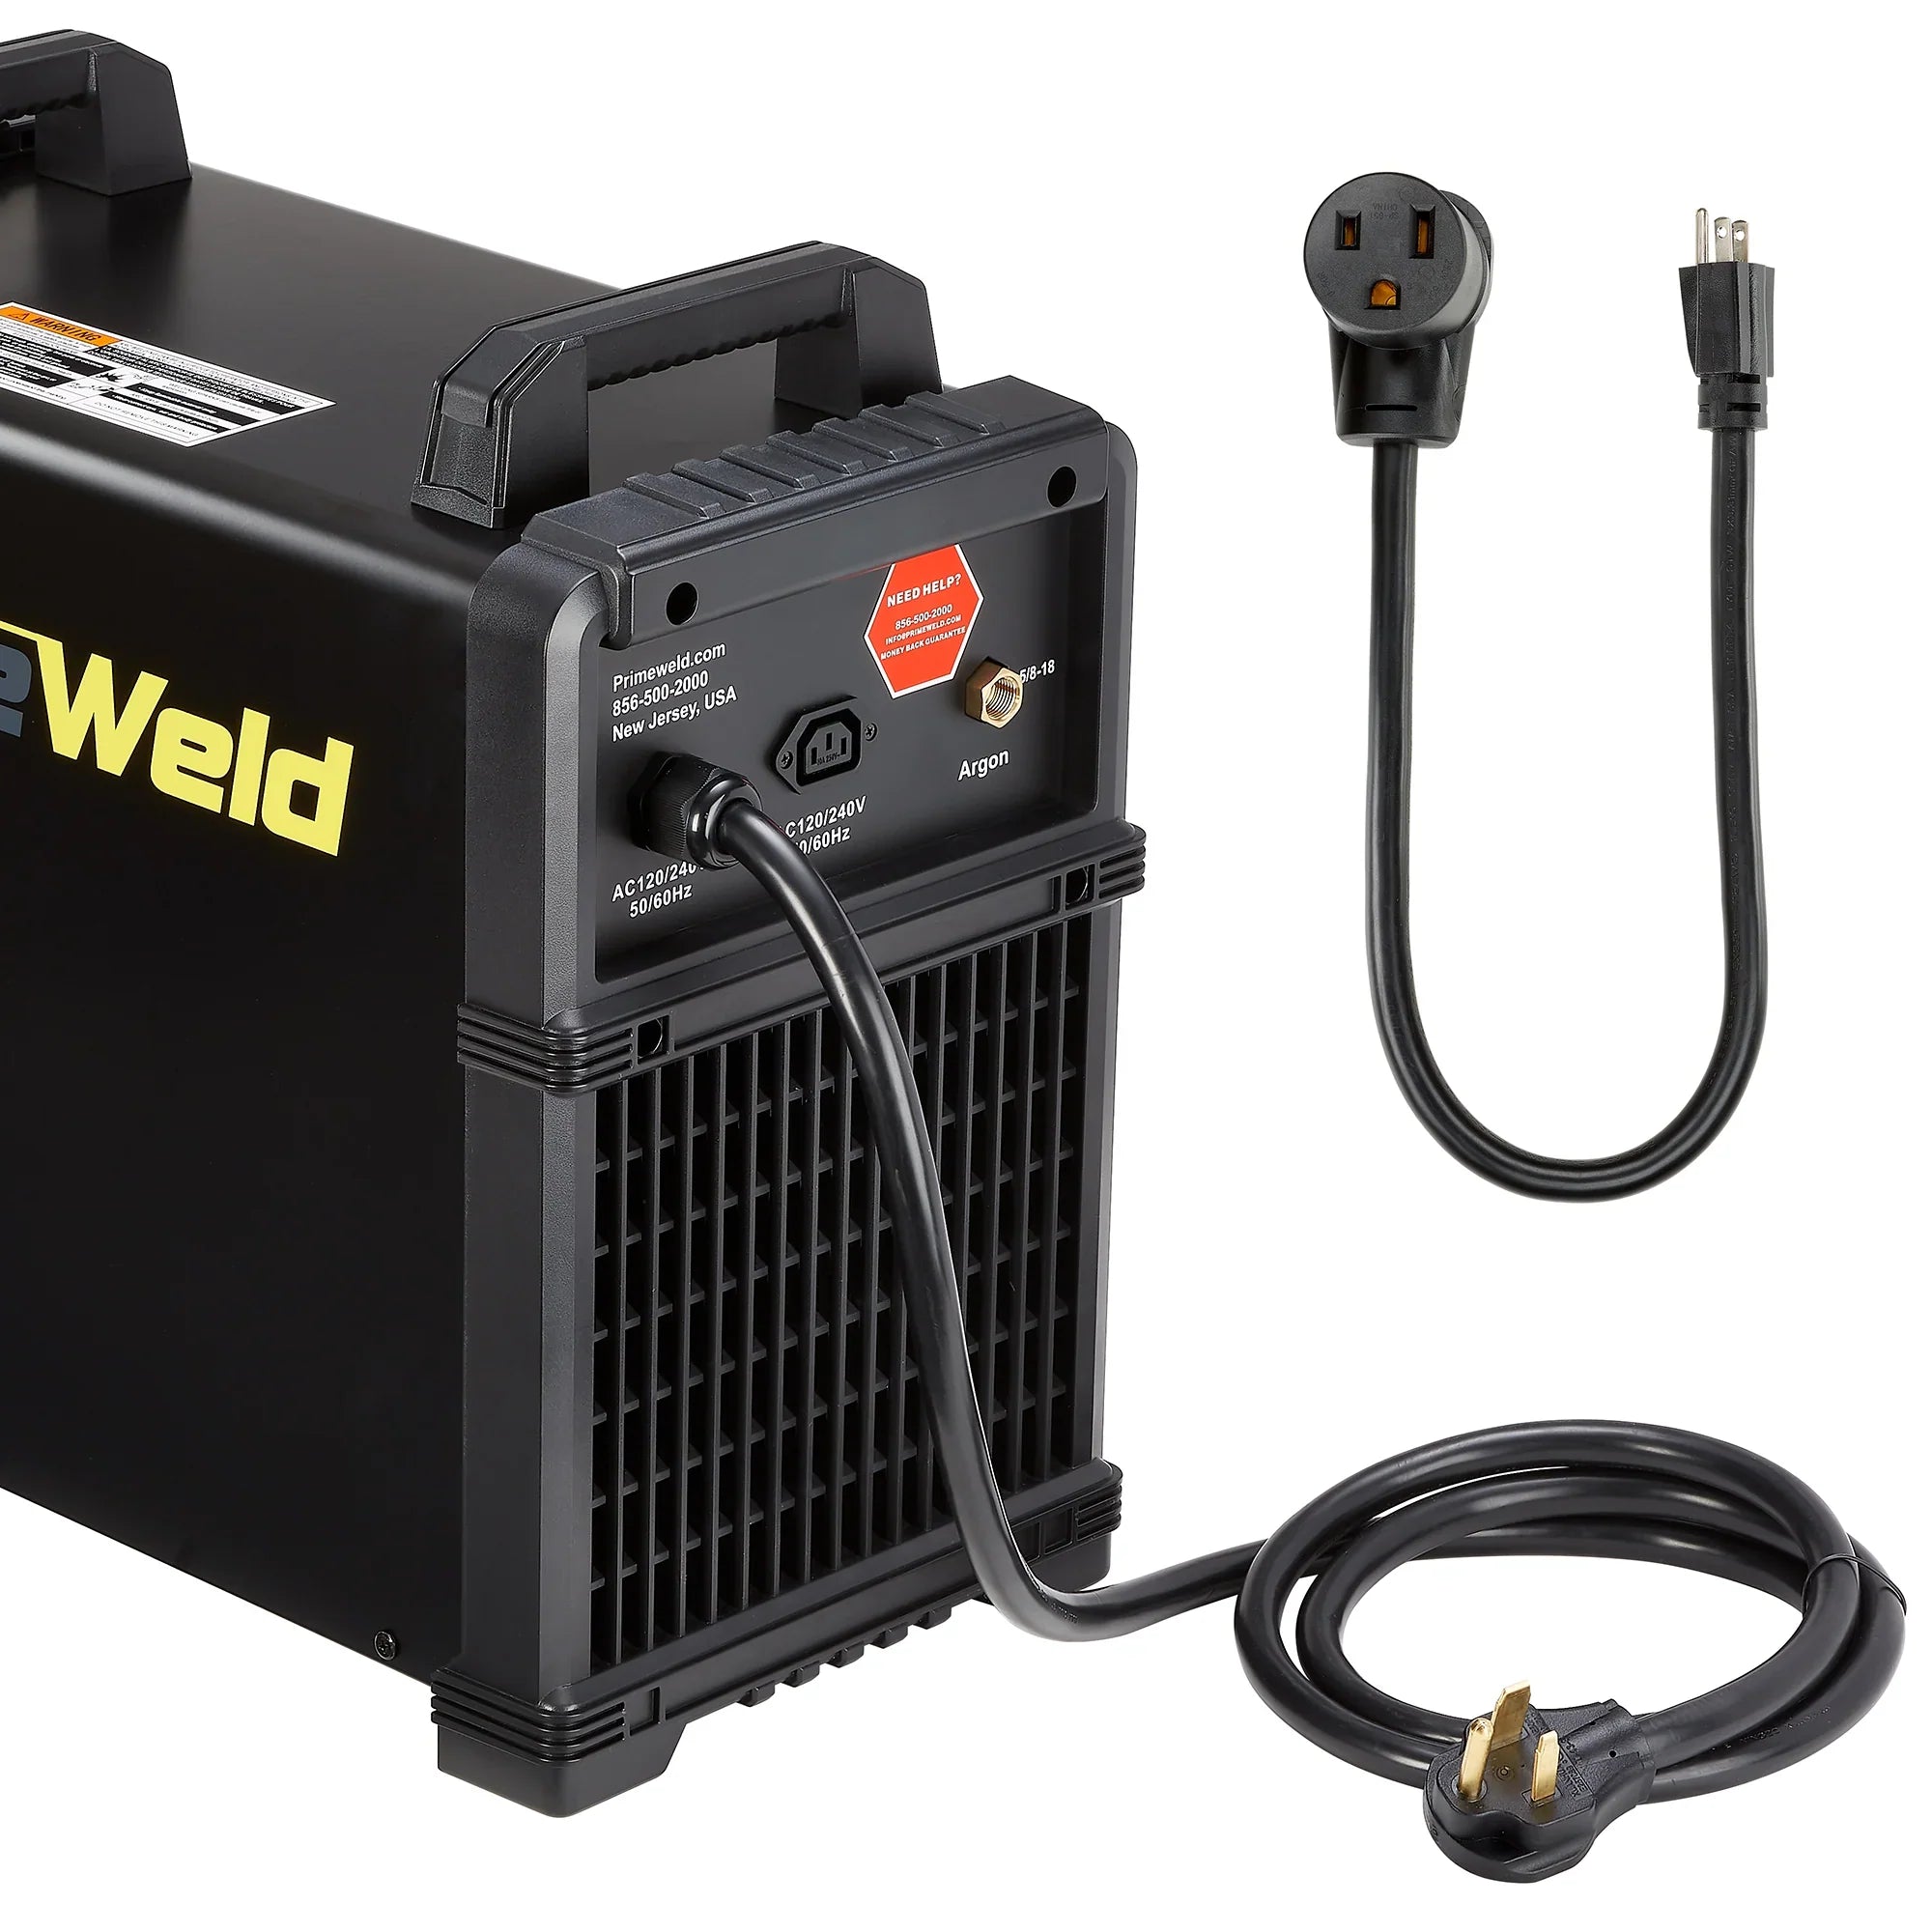 PrimeWeld TIG325X Complete Package - AC/DC TIG Welder With Foot Pedal, Maxcool 3000 Water Cooler, Water Cooled CK #20 Style Torch W/25ft Superflex, Water Cooled Dinse Connector